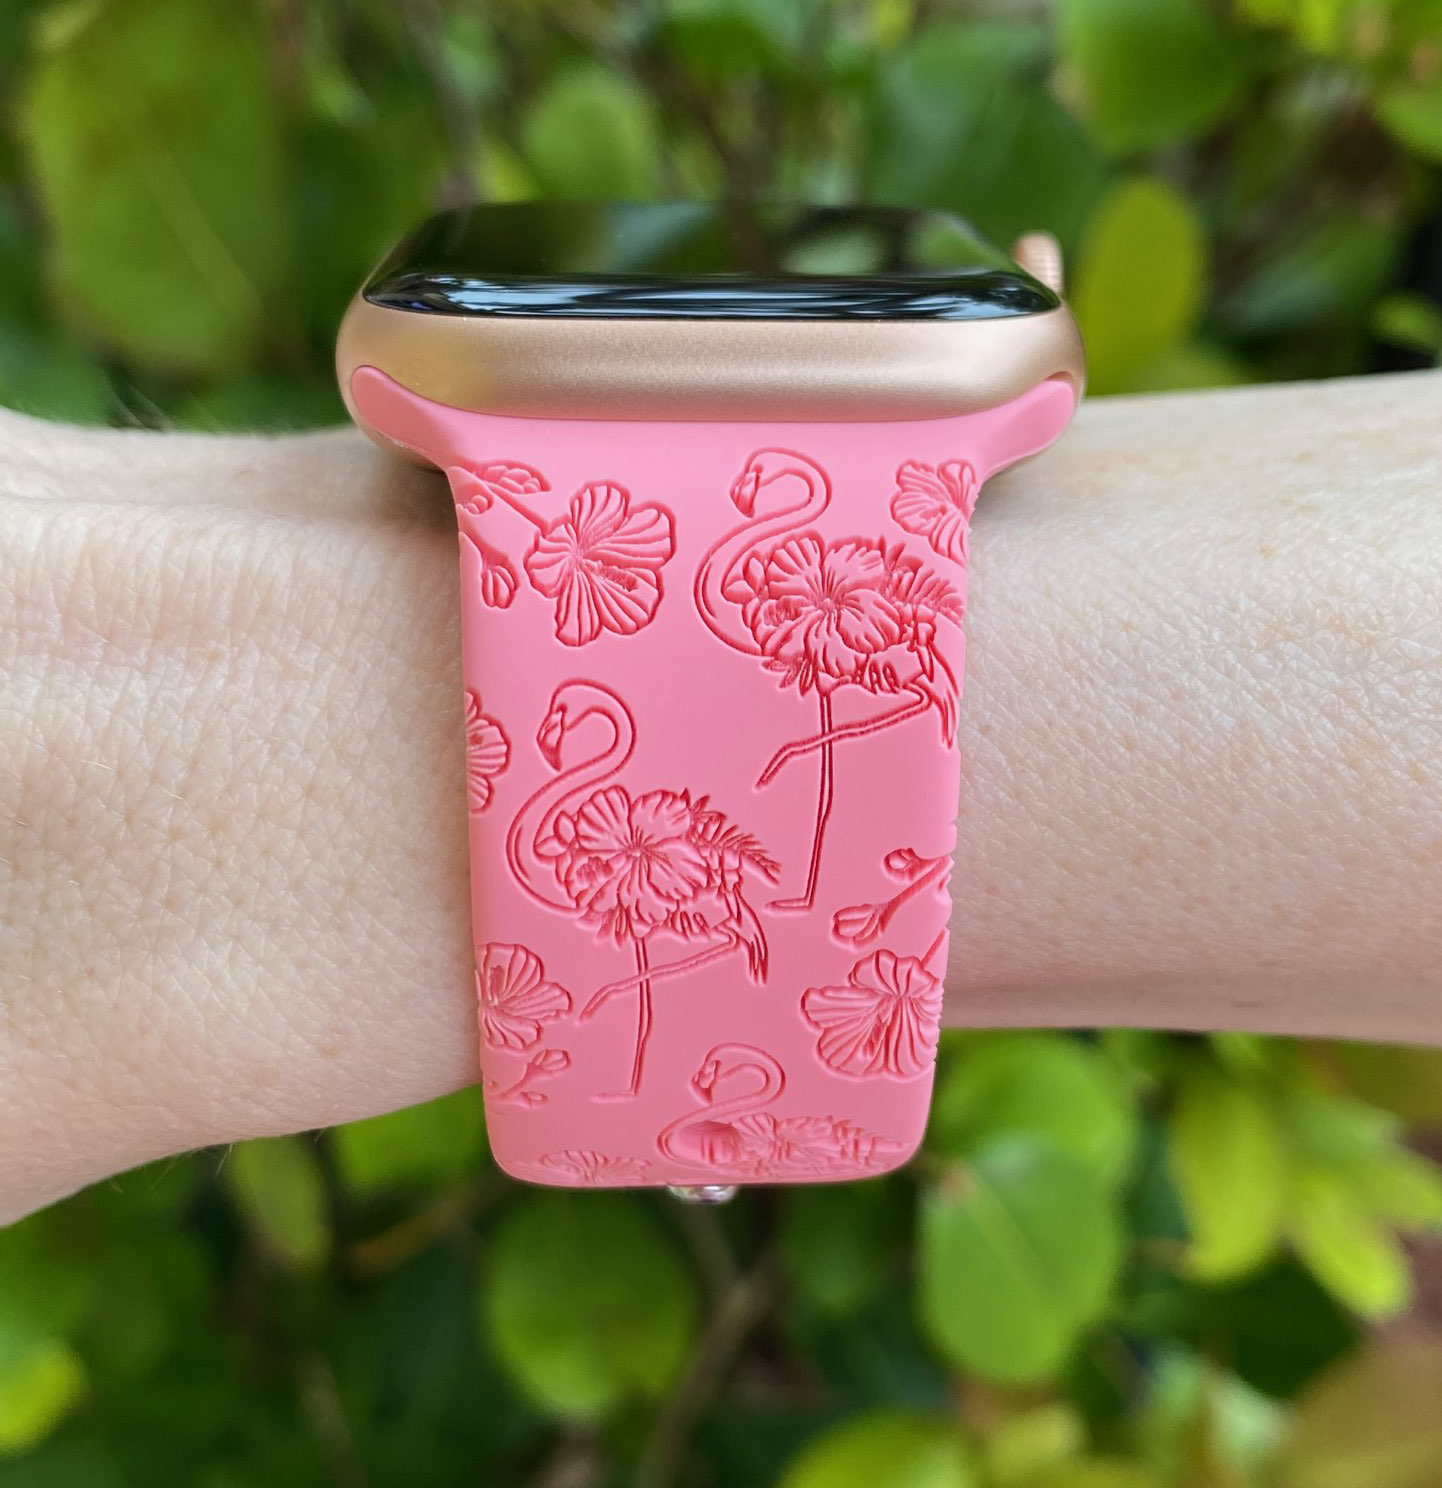 Flamingo Lover Apple Watch Band